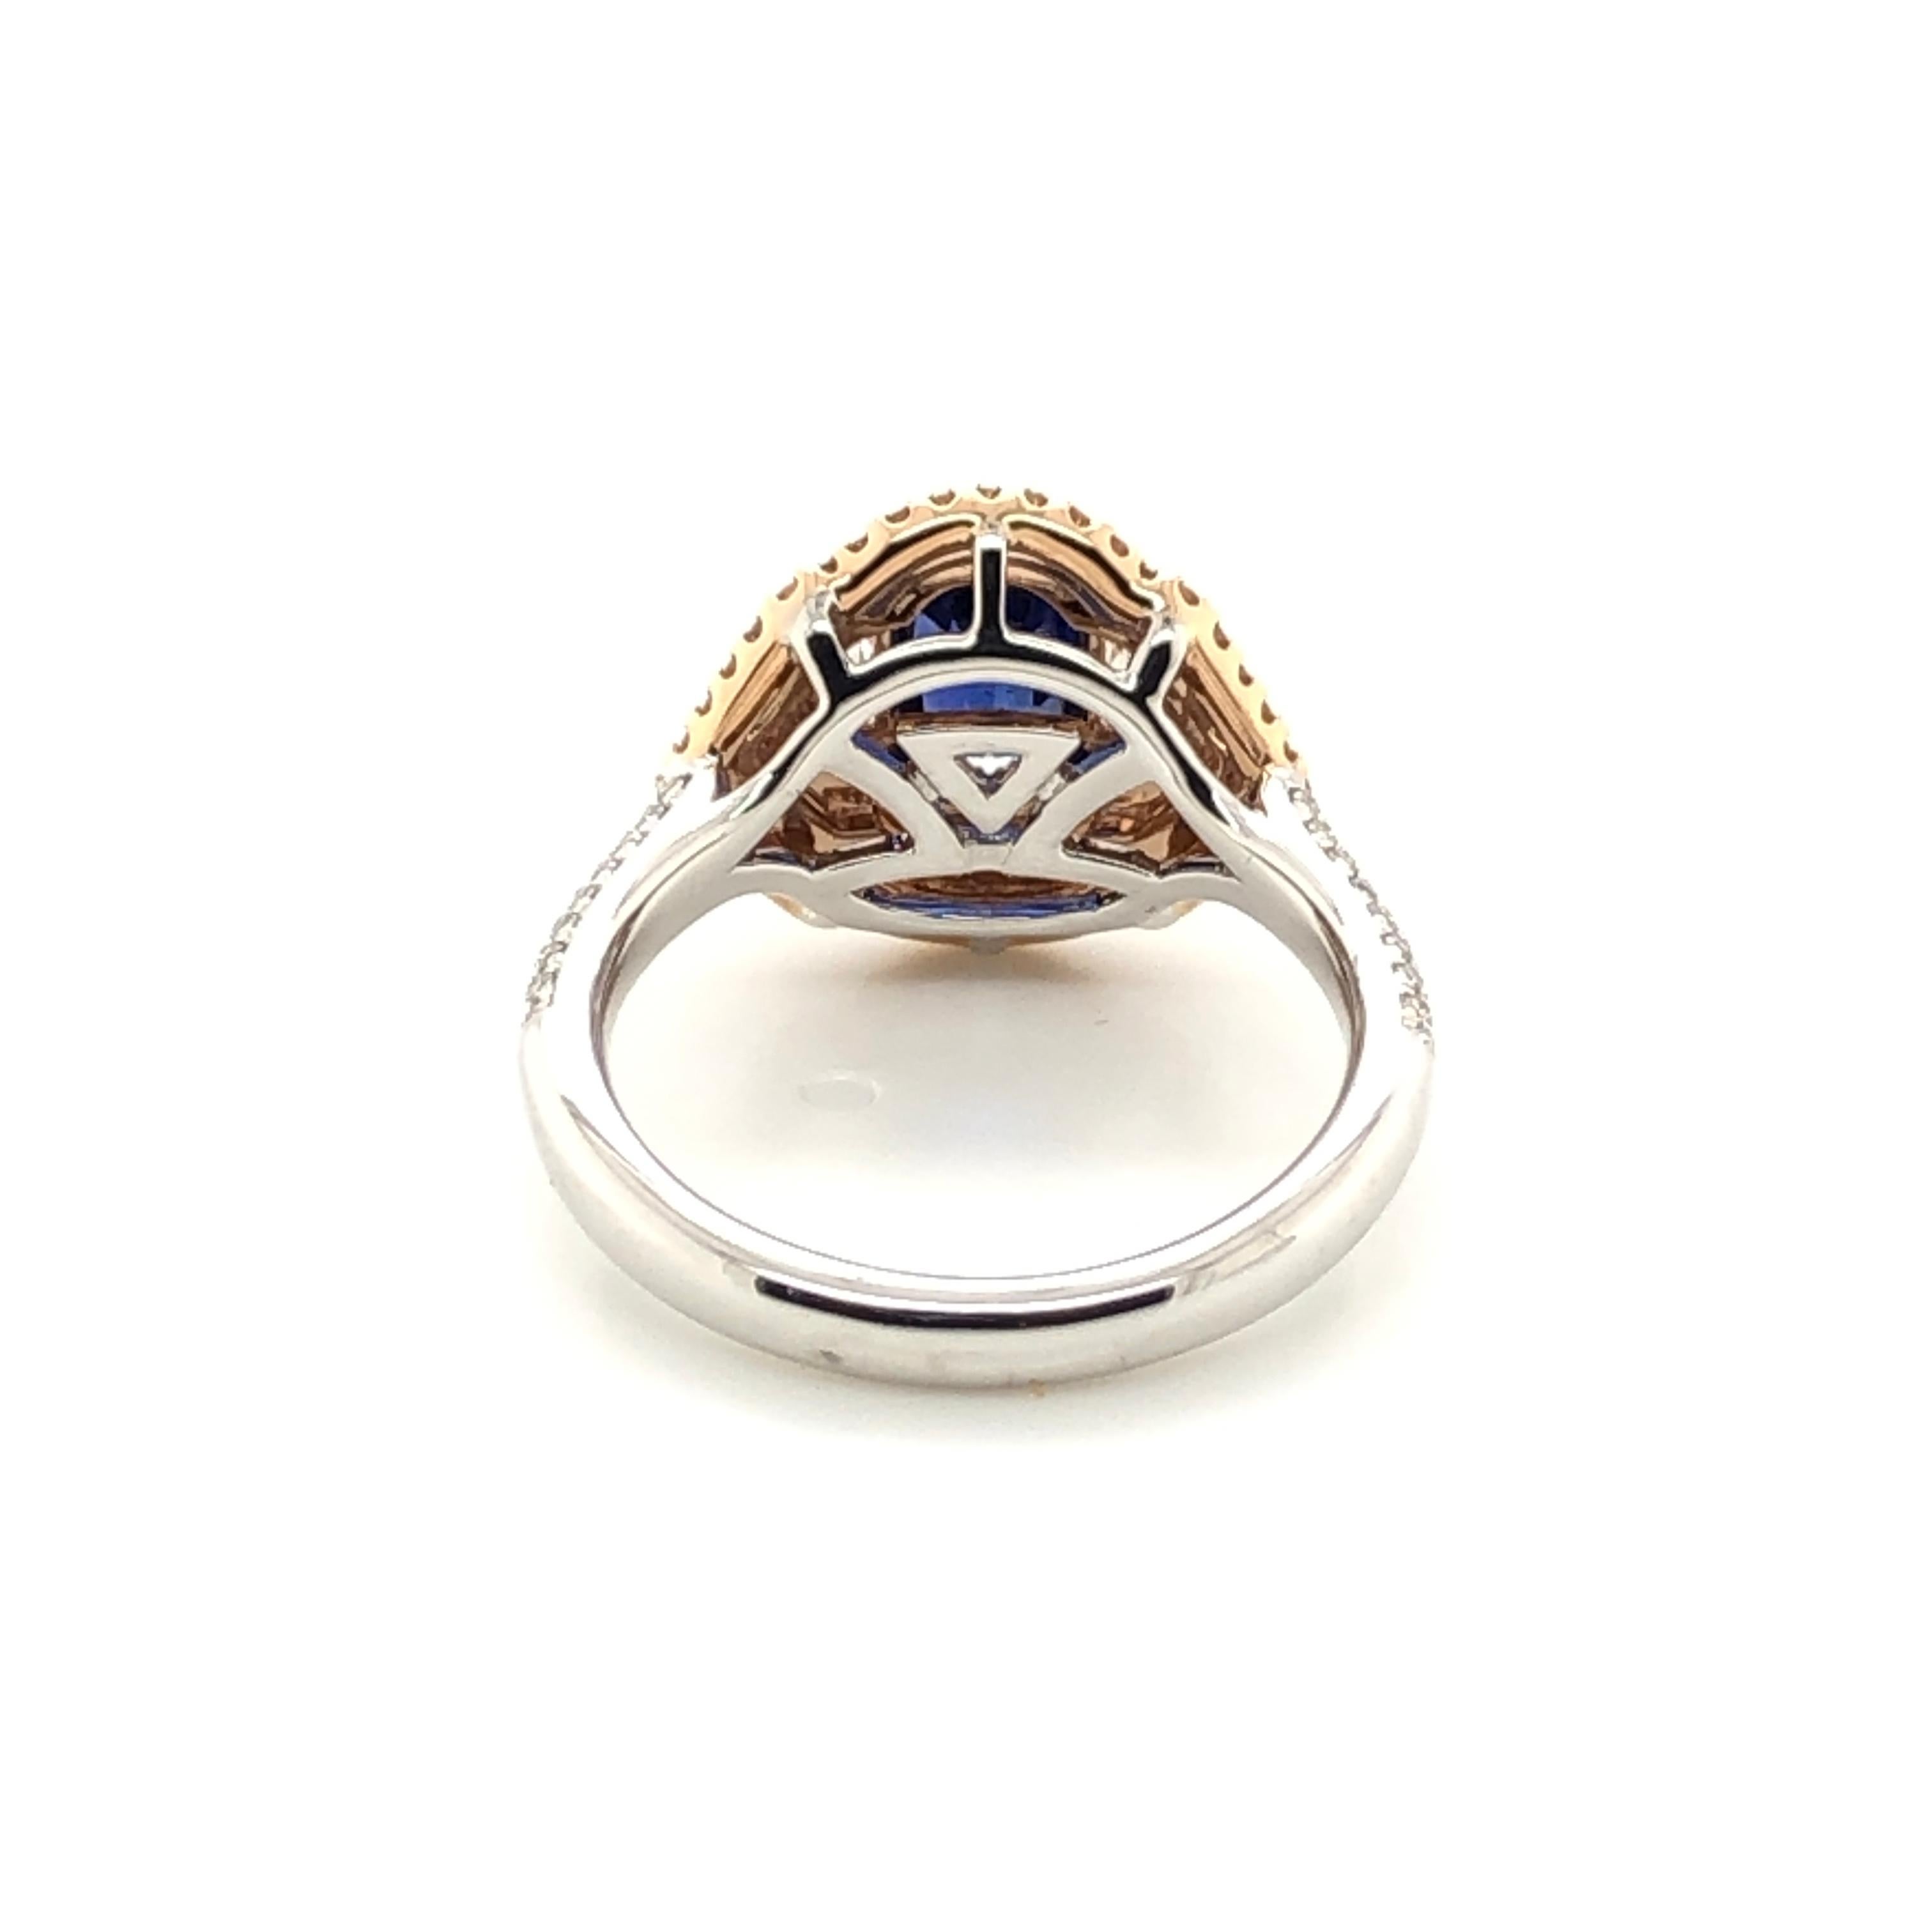 Le Vian 1.33 Carat Sapphire White Diamond Platinum Rose Gold Ring In New Condition For Sale In Great Neck, NY